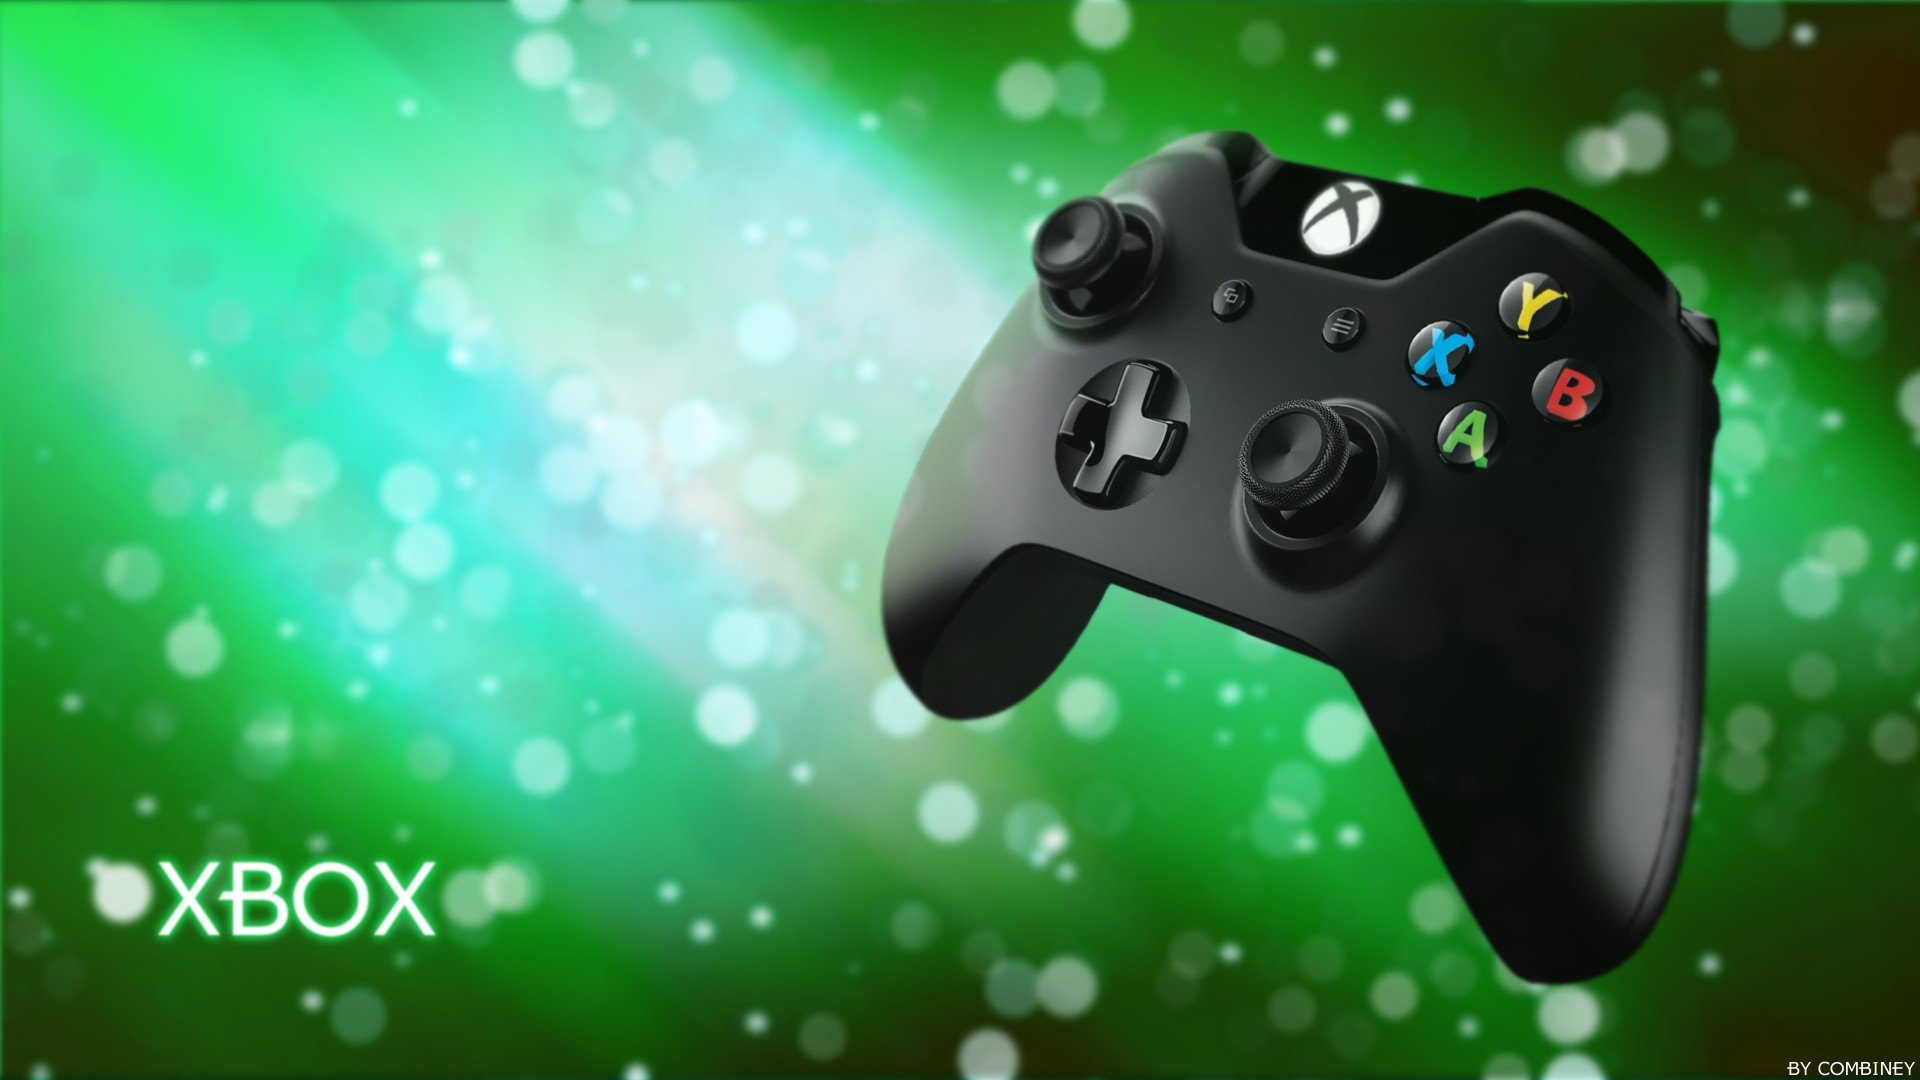 Xbox One Game Wallpaper Video System